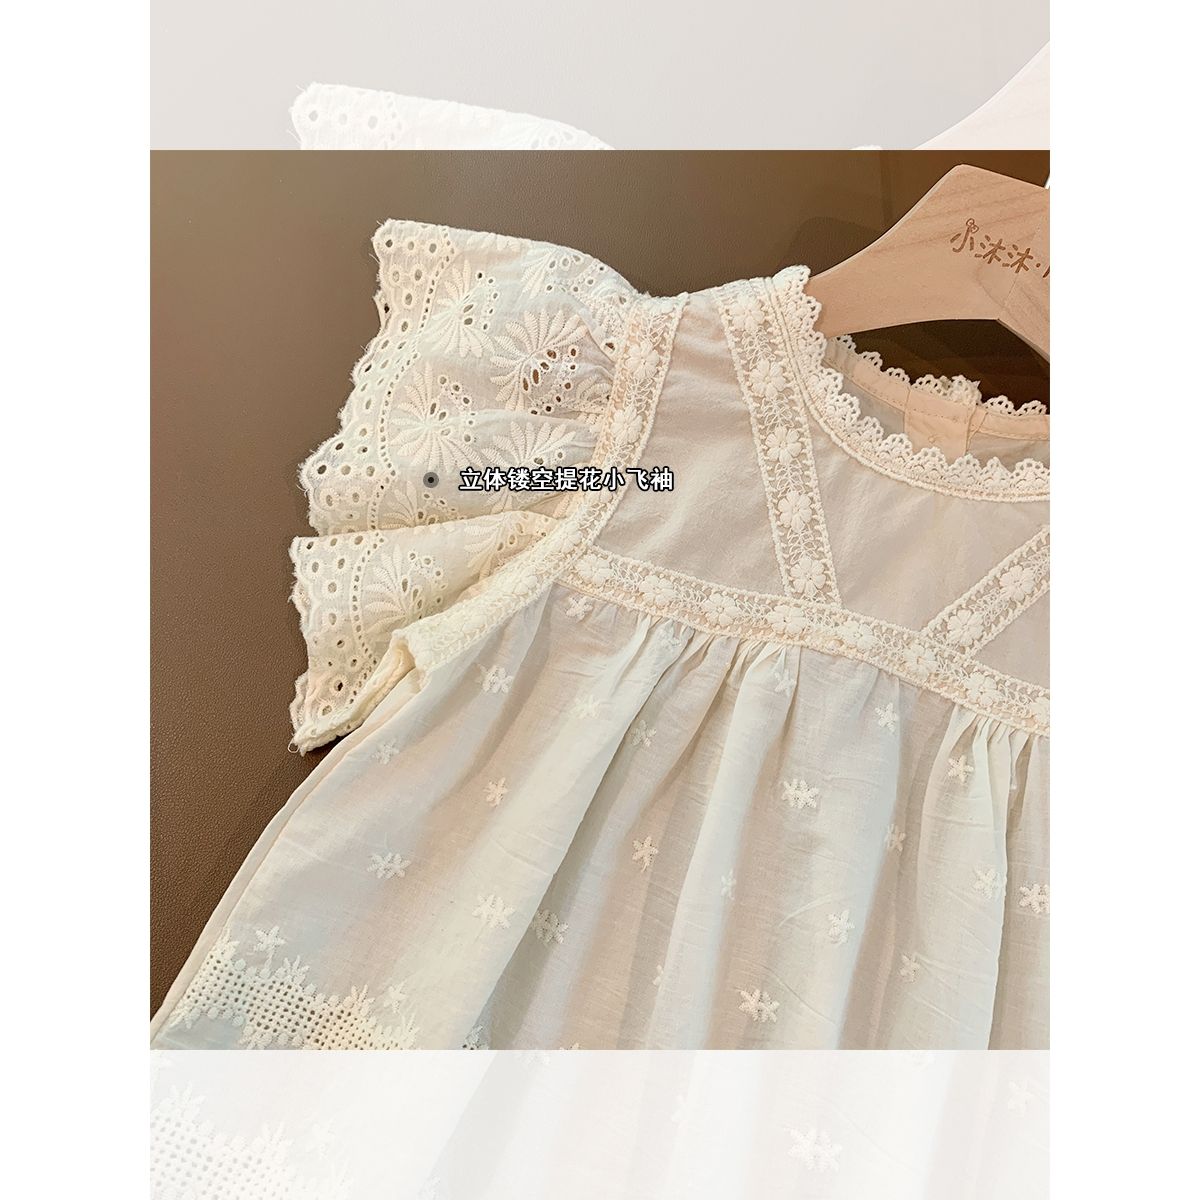 Girls' suit 2022 summer new Korean version of the female treasure shirt top lace anti-mosquito pants western style fashionable two-piece set